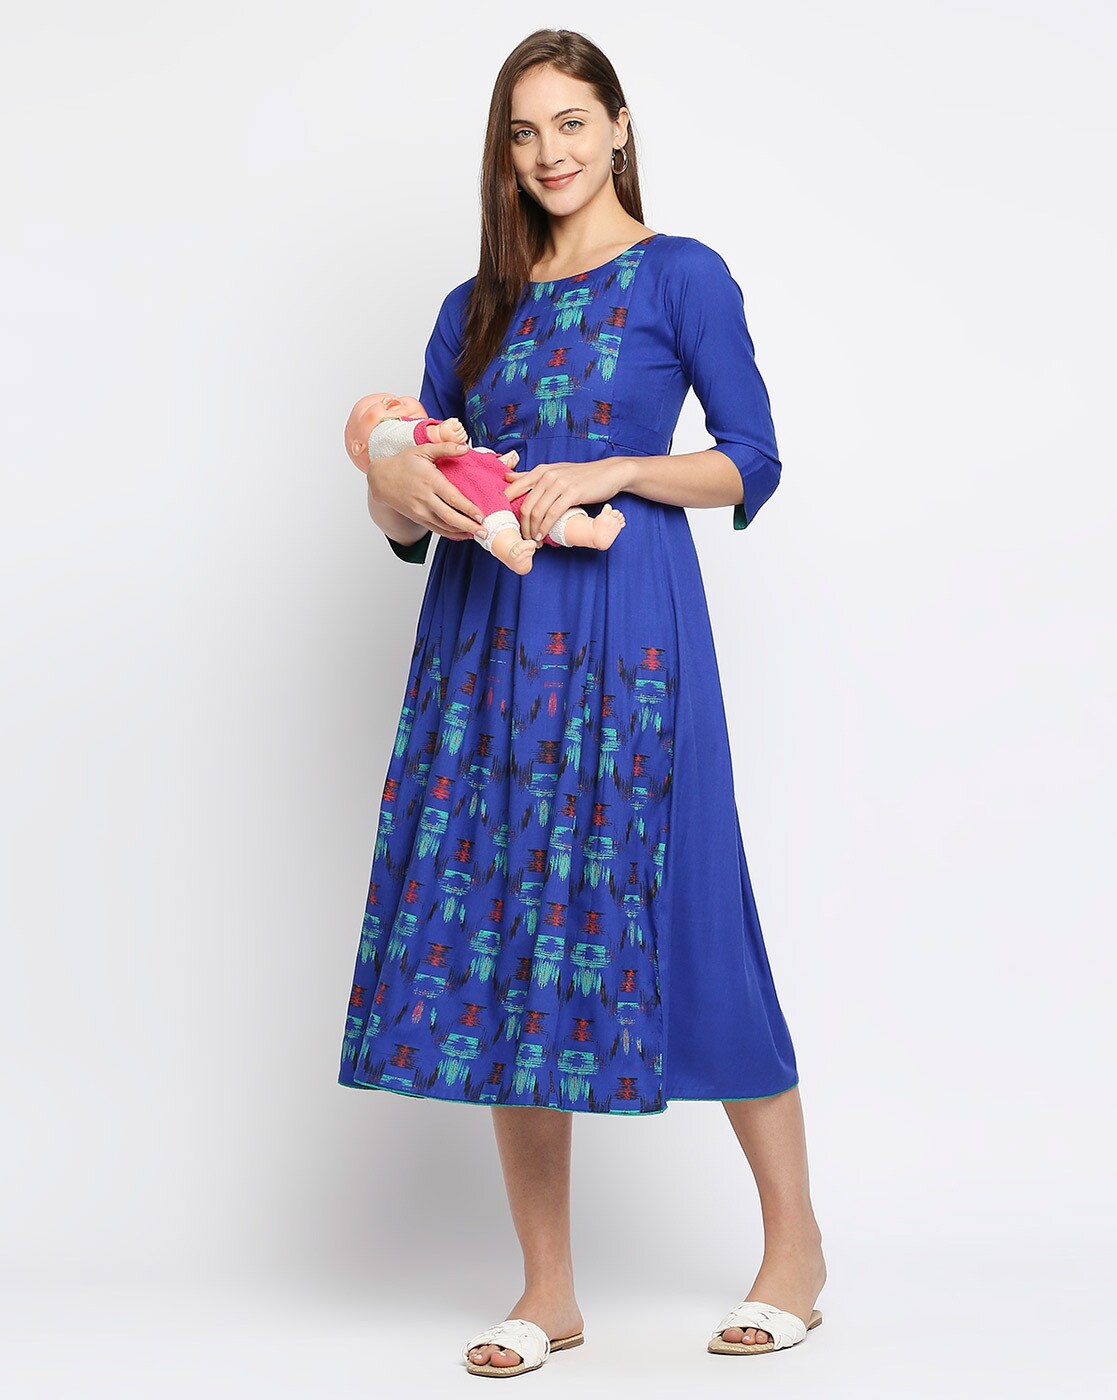 Max Womens Ethnic Sets - Buy Max Womens Ethnic Sets Online at Best Prices  In India | Flipkart.com